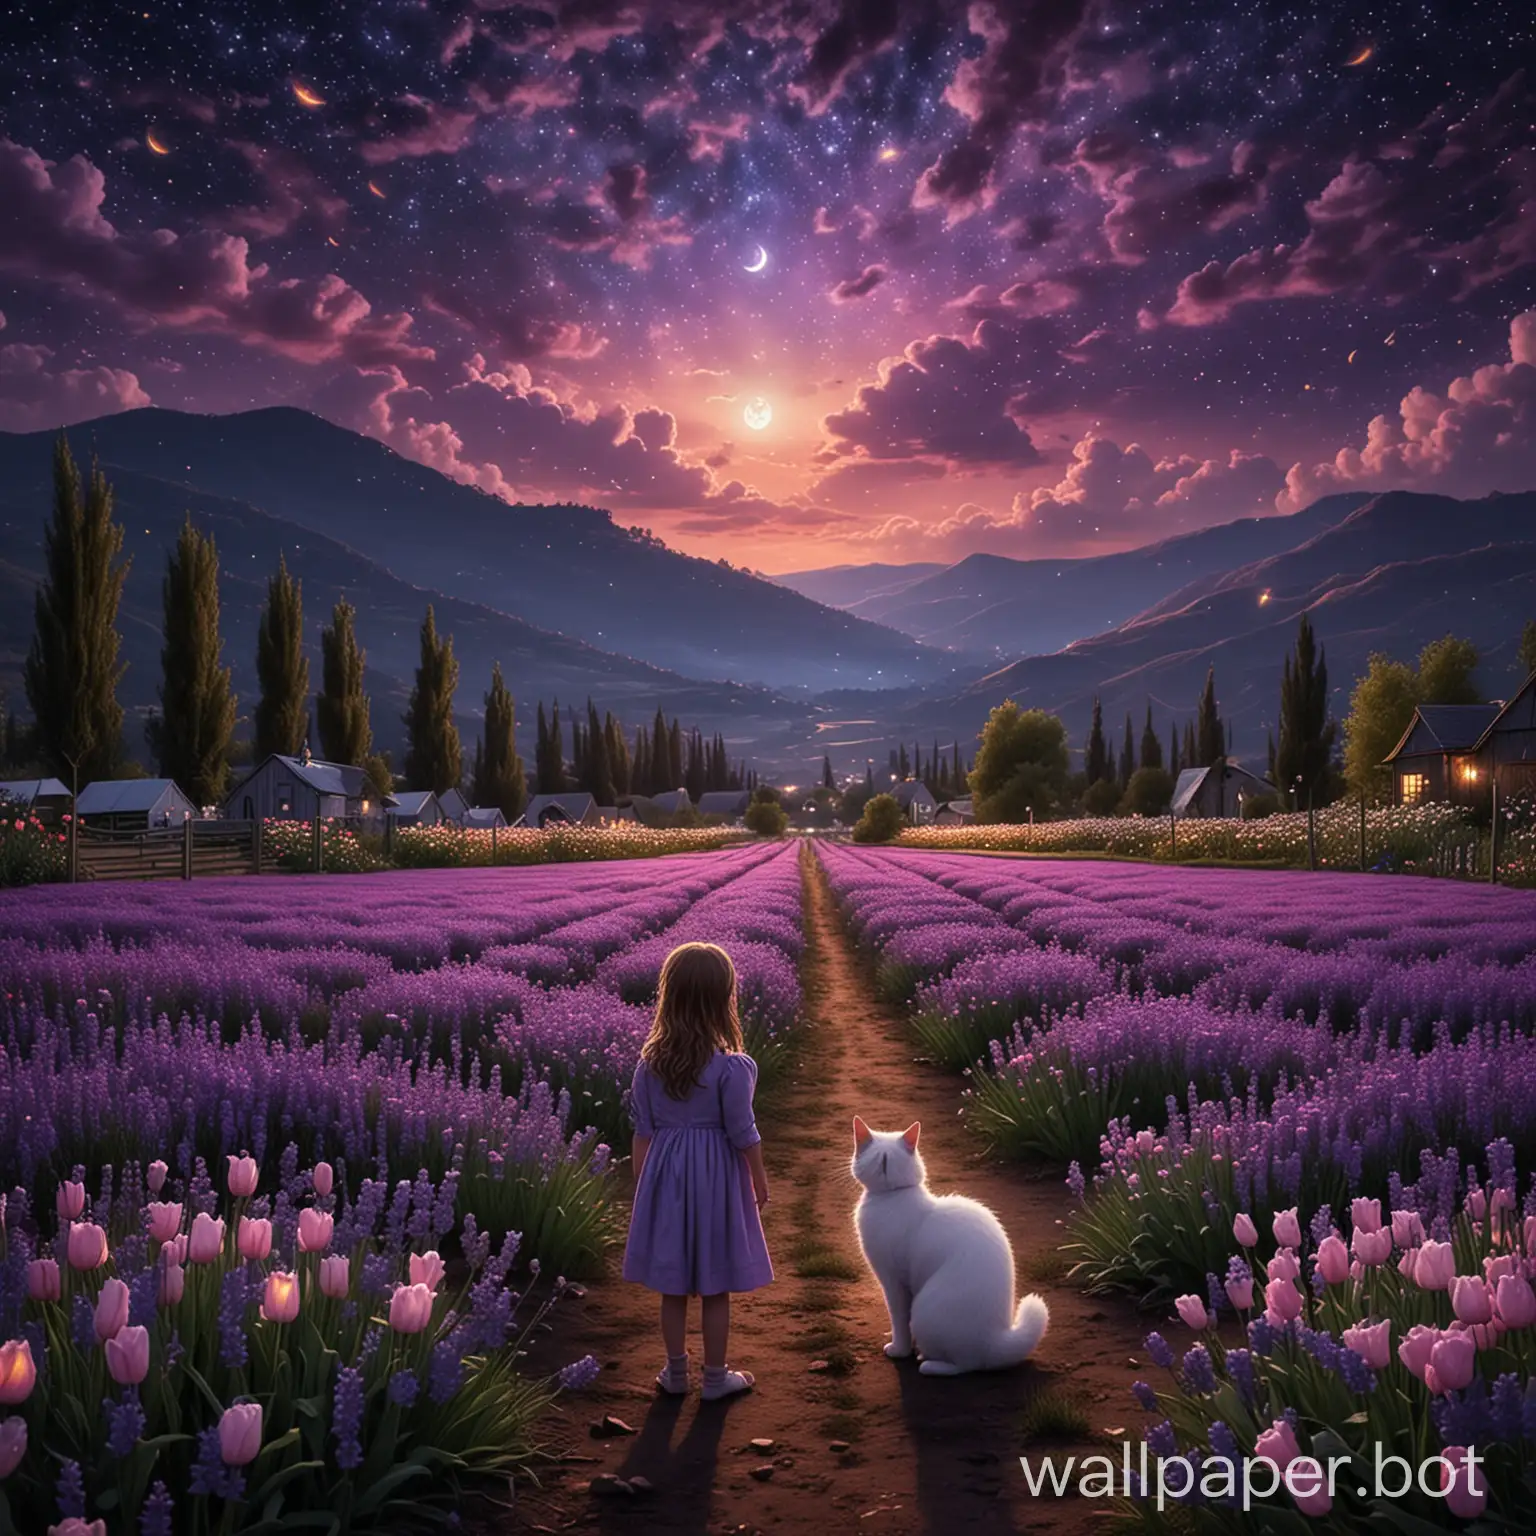 Enchanting-Night-Scene-Little-Girl-and-Cat-in-Lavender-and-Tulip-Farm-with-Fireflies